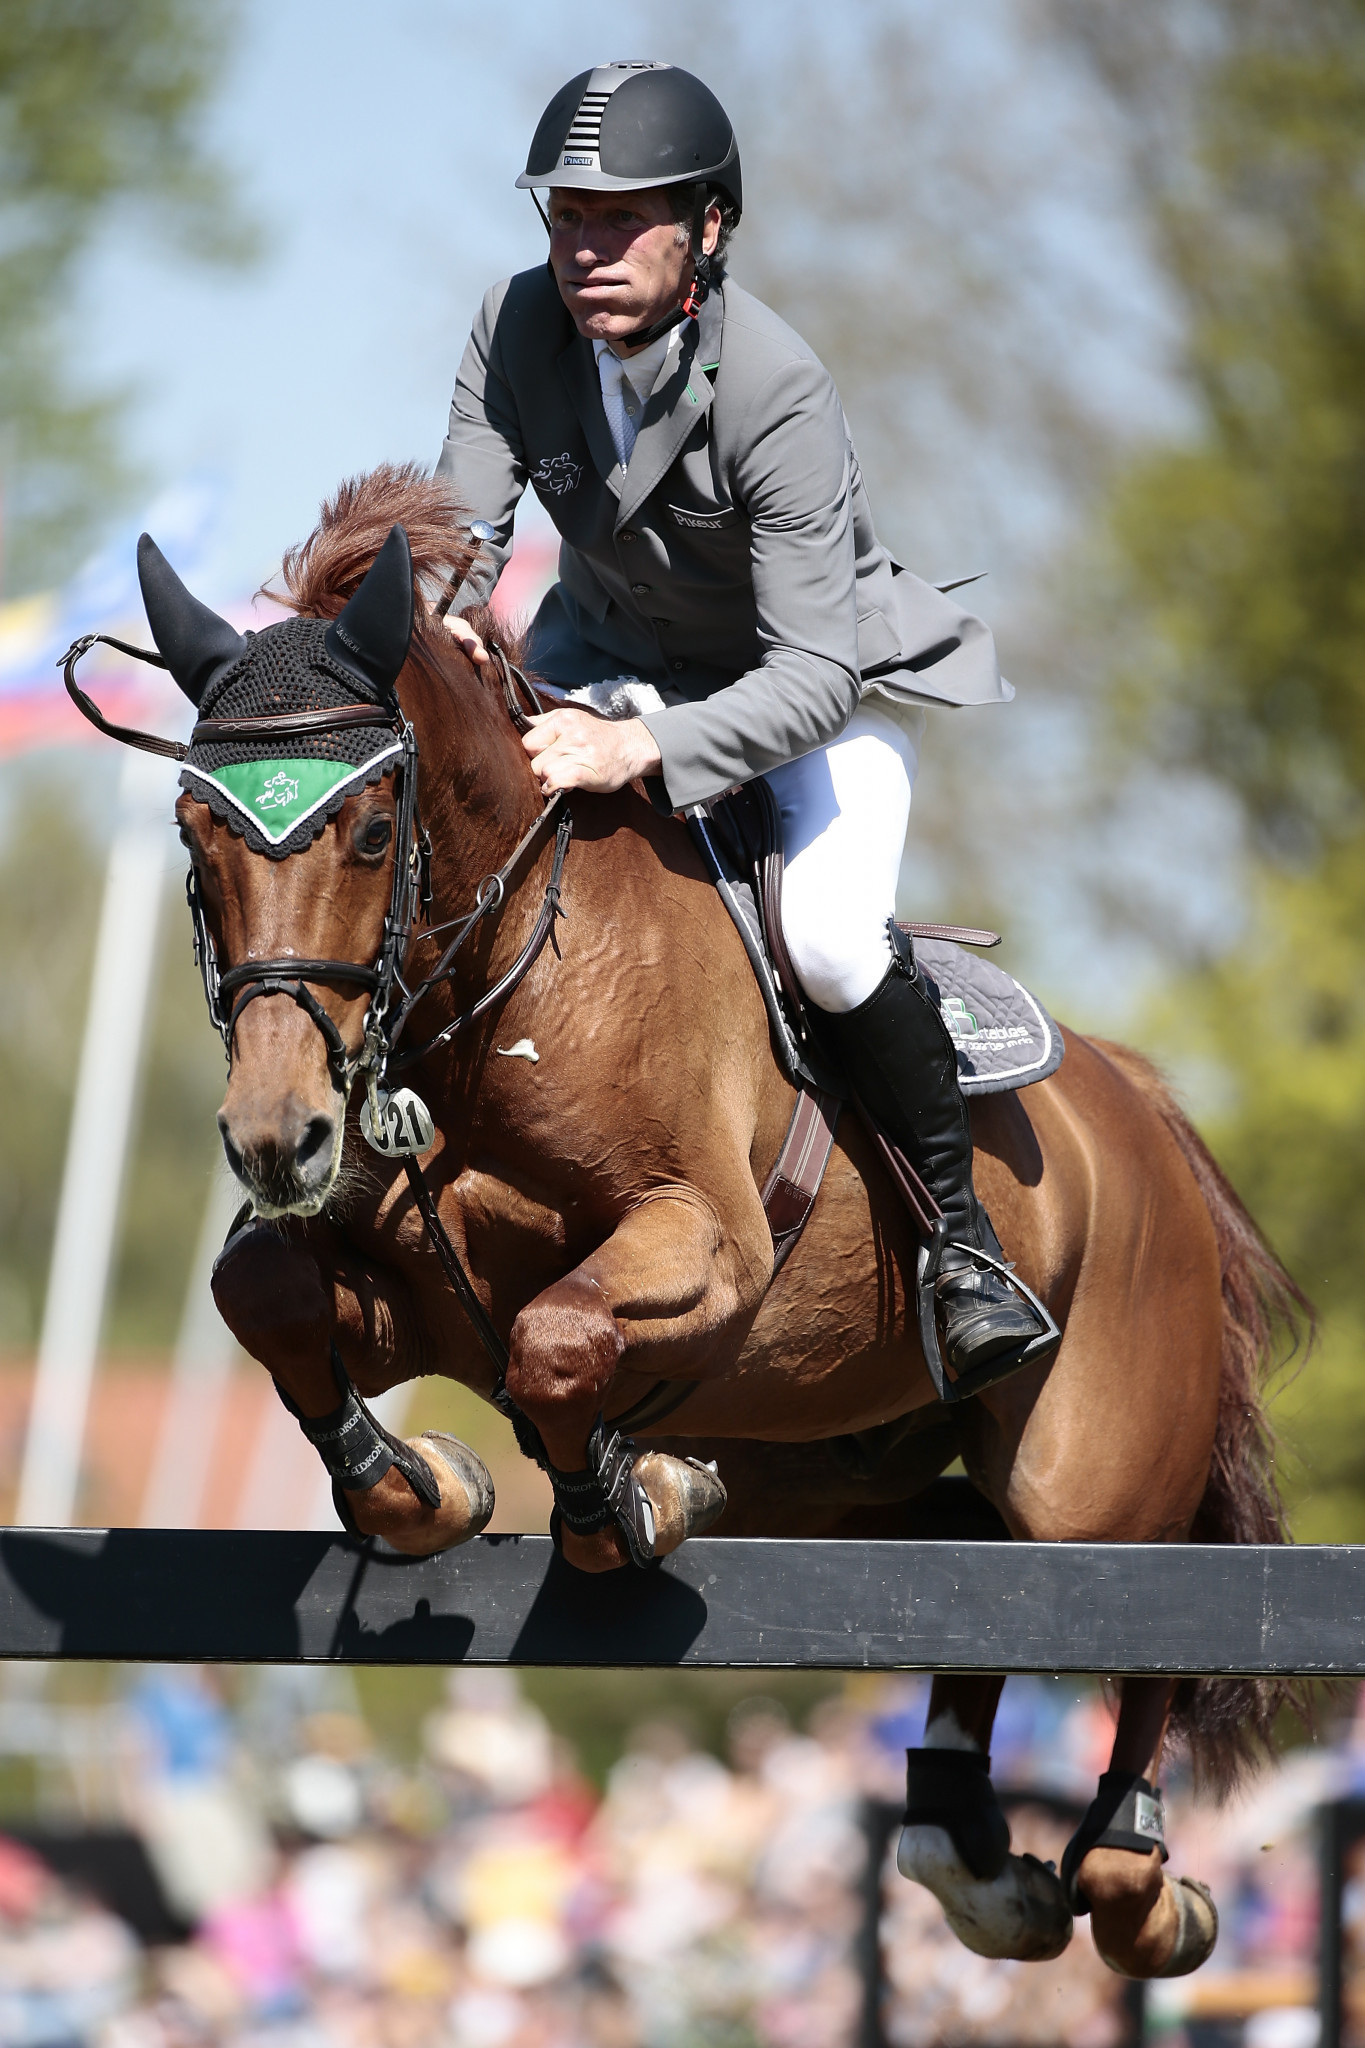 Germany's multiple Olympic champion Ludger Beerbaum was the only rider left in the jump-off after Edwin Tops-Alexander but could not prevent her winning the latest stage of the World Cup Western European League ©FEI